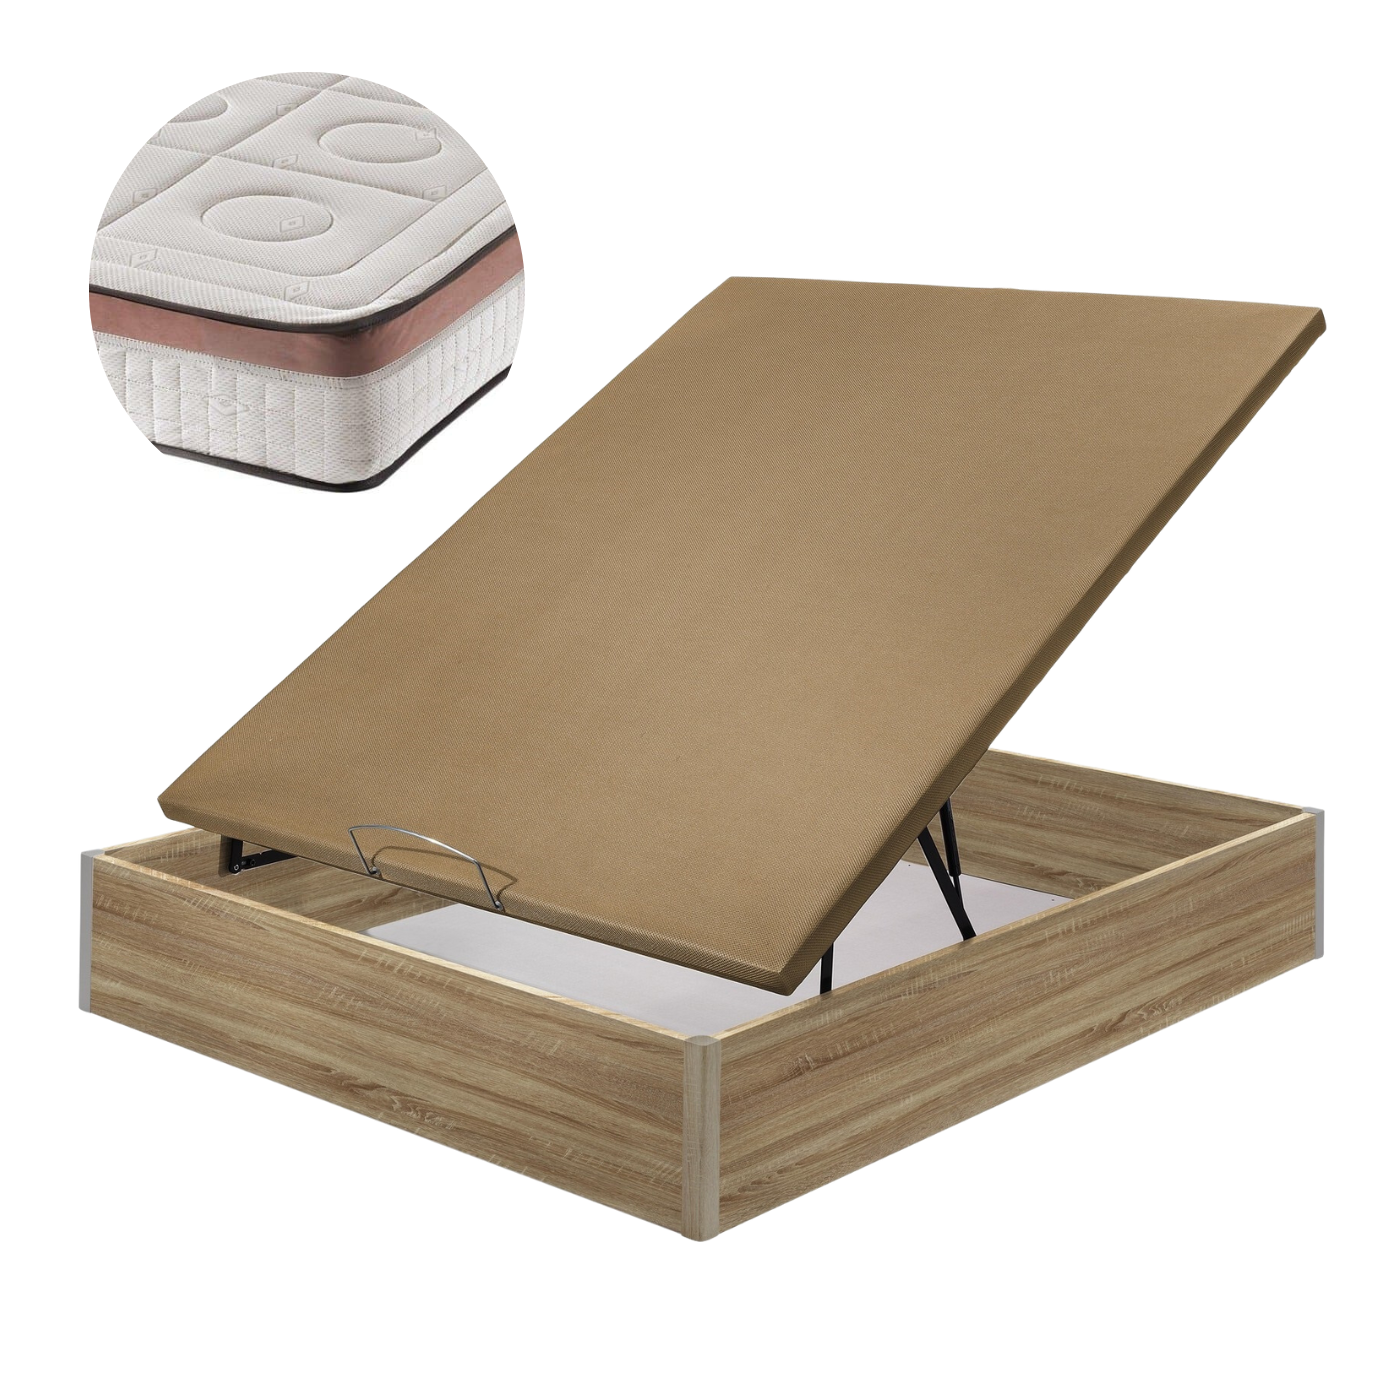 Pack Canapé Madera Basic Roble y Colchón Toscana deluxe  | 21 cm